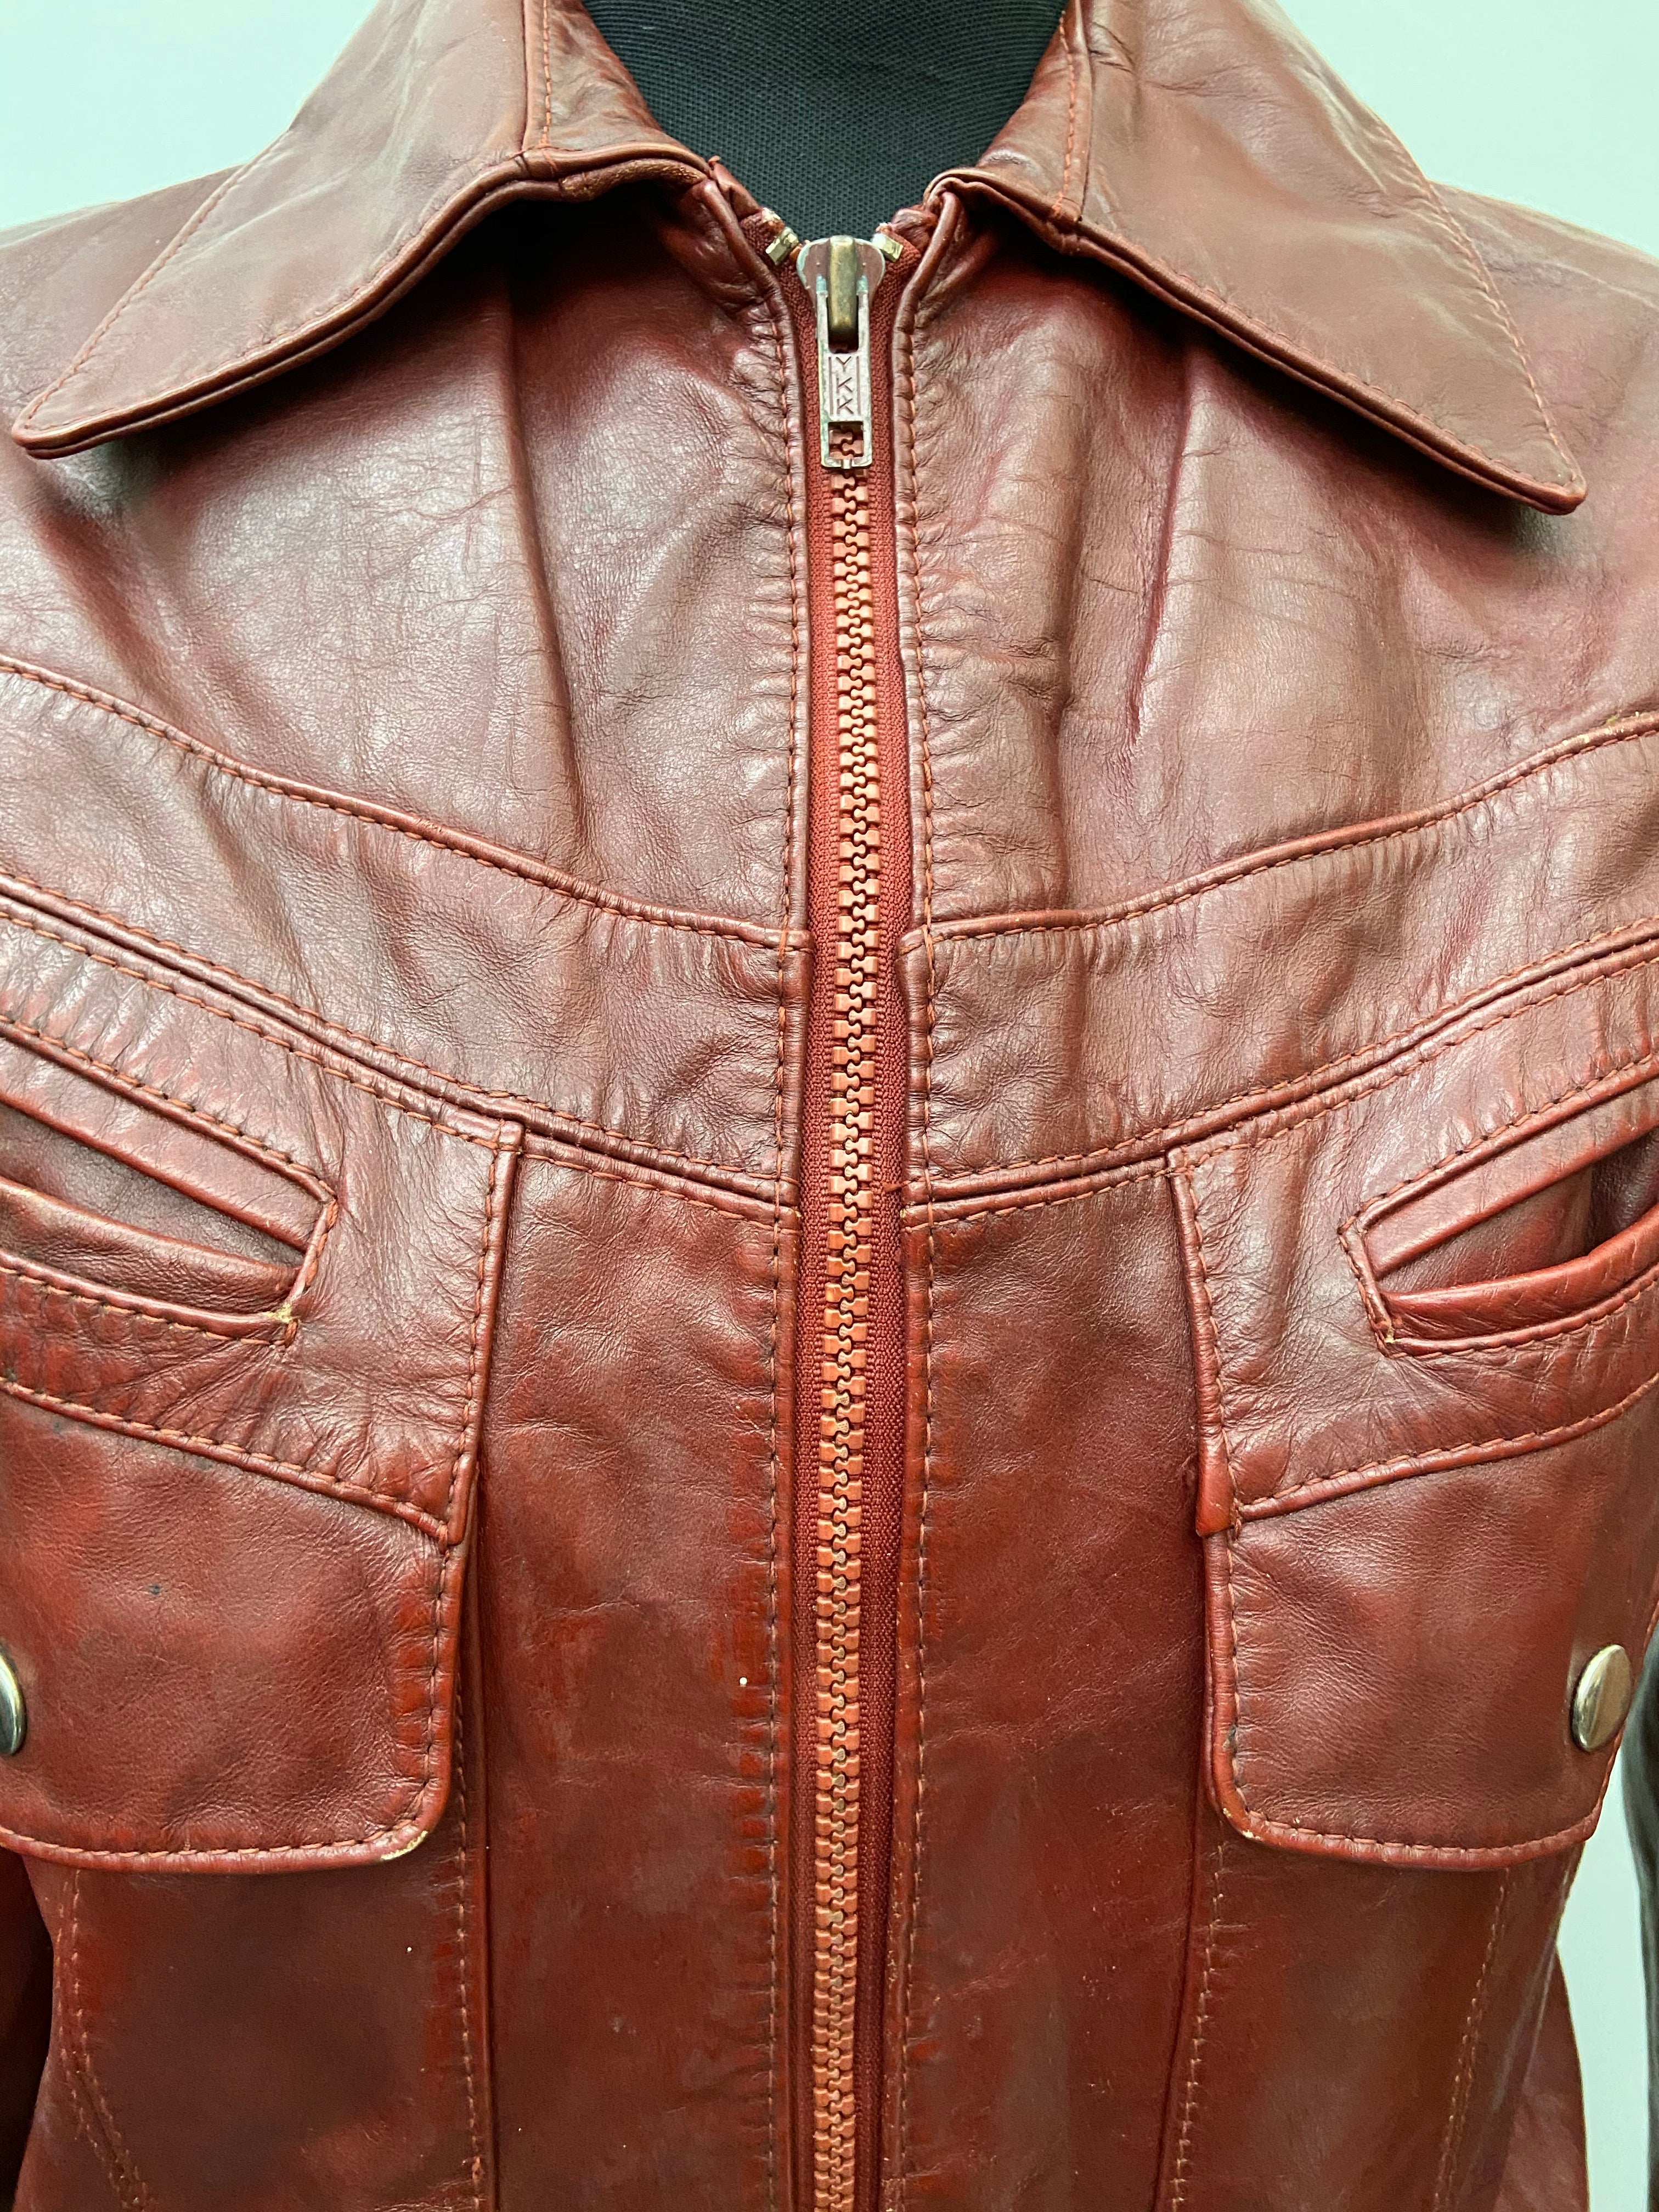 Vintage 1970s Leather Bomber Jacket with Fur Lining by Bermans in Burgundy - Size UK 10